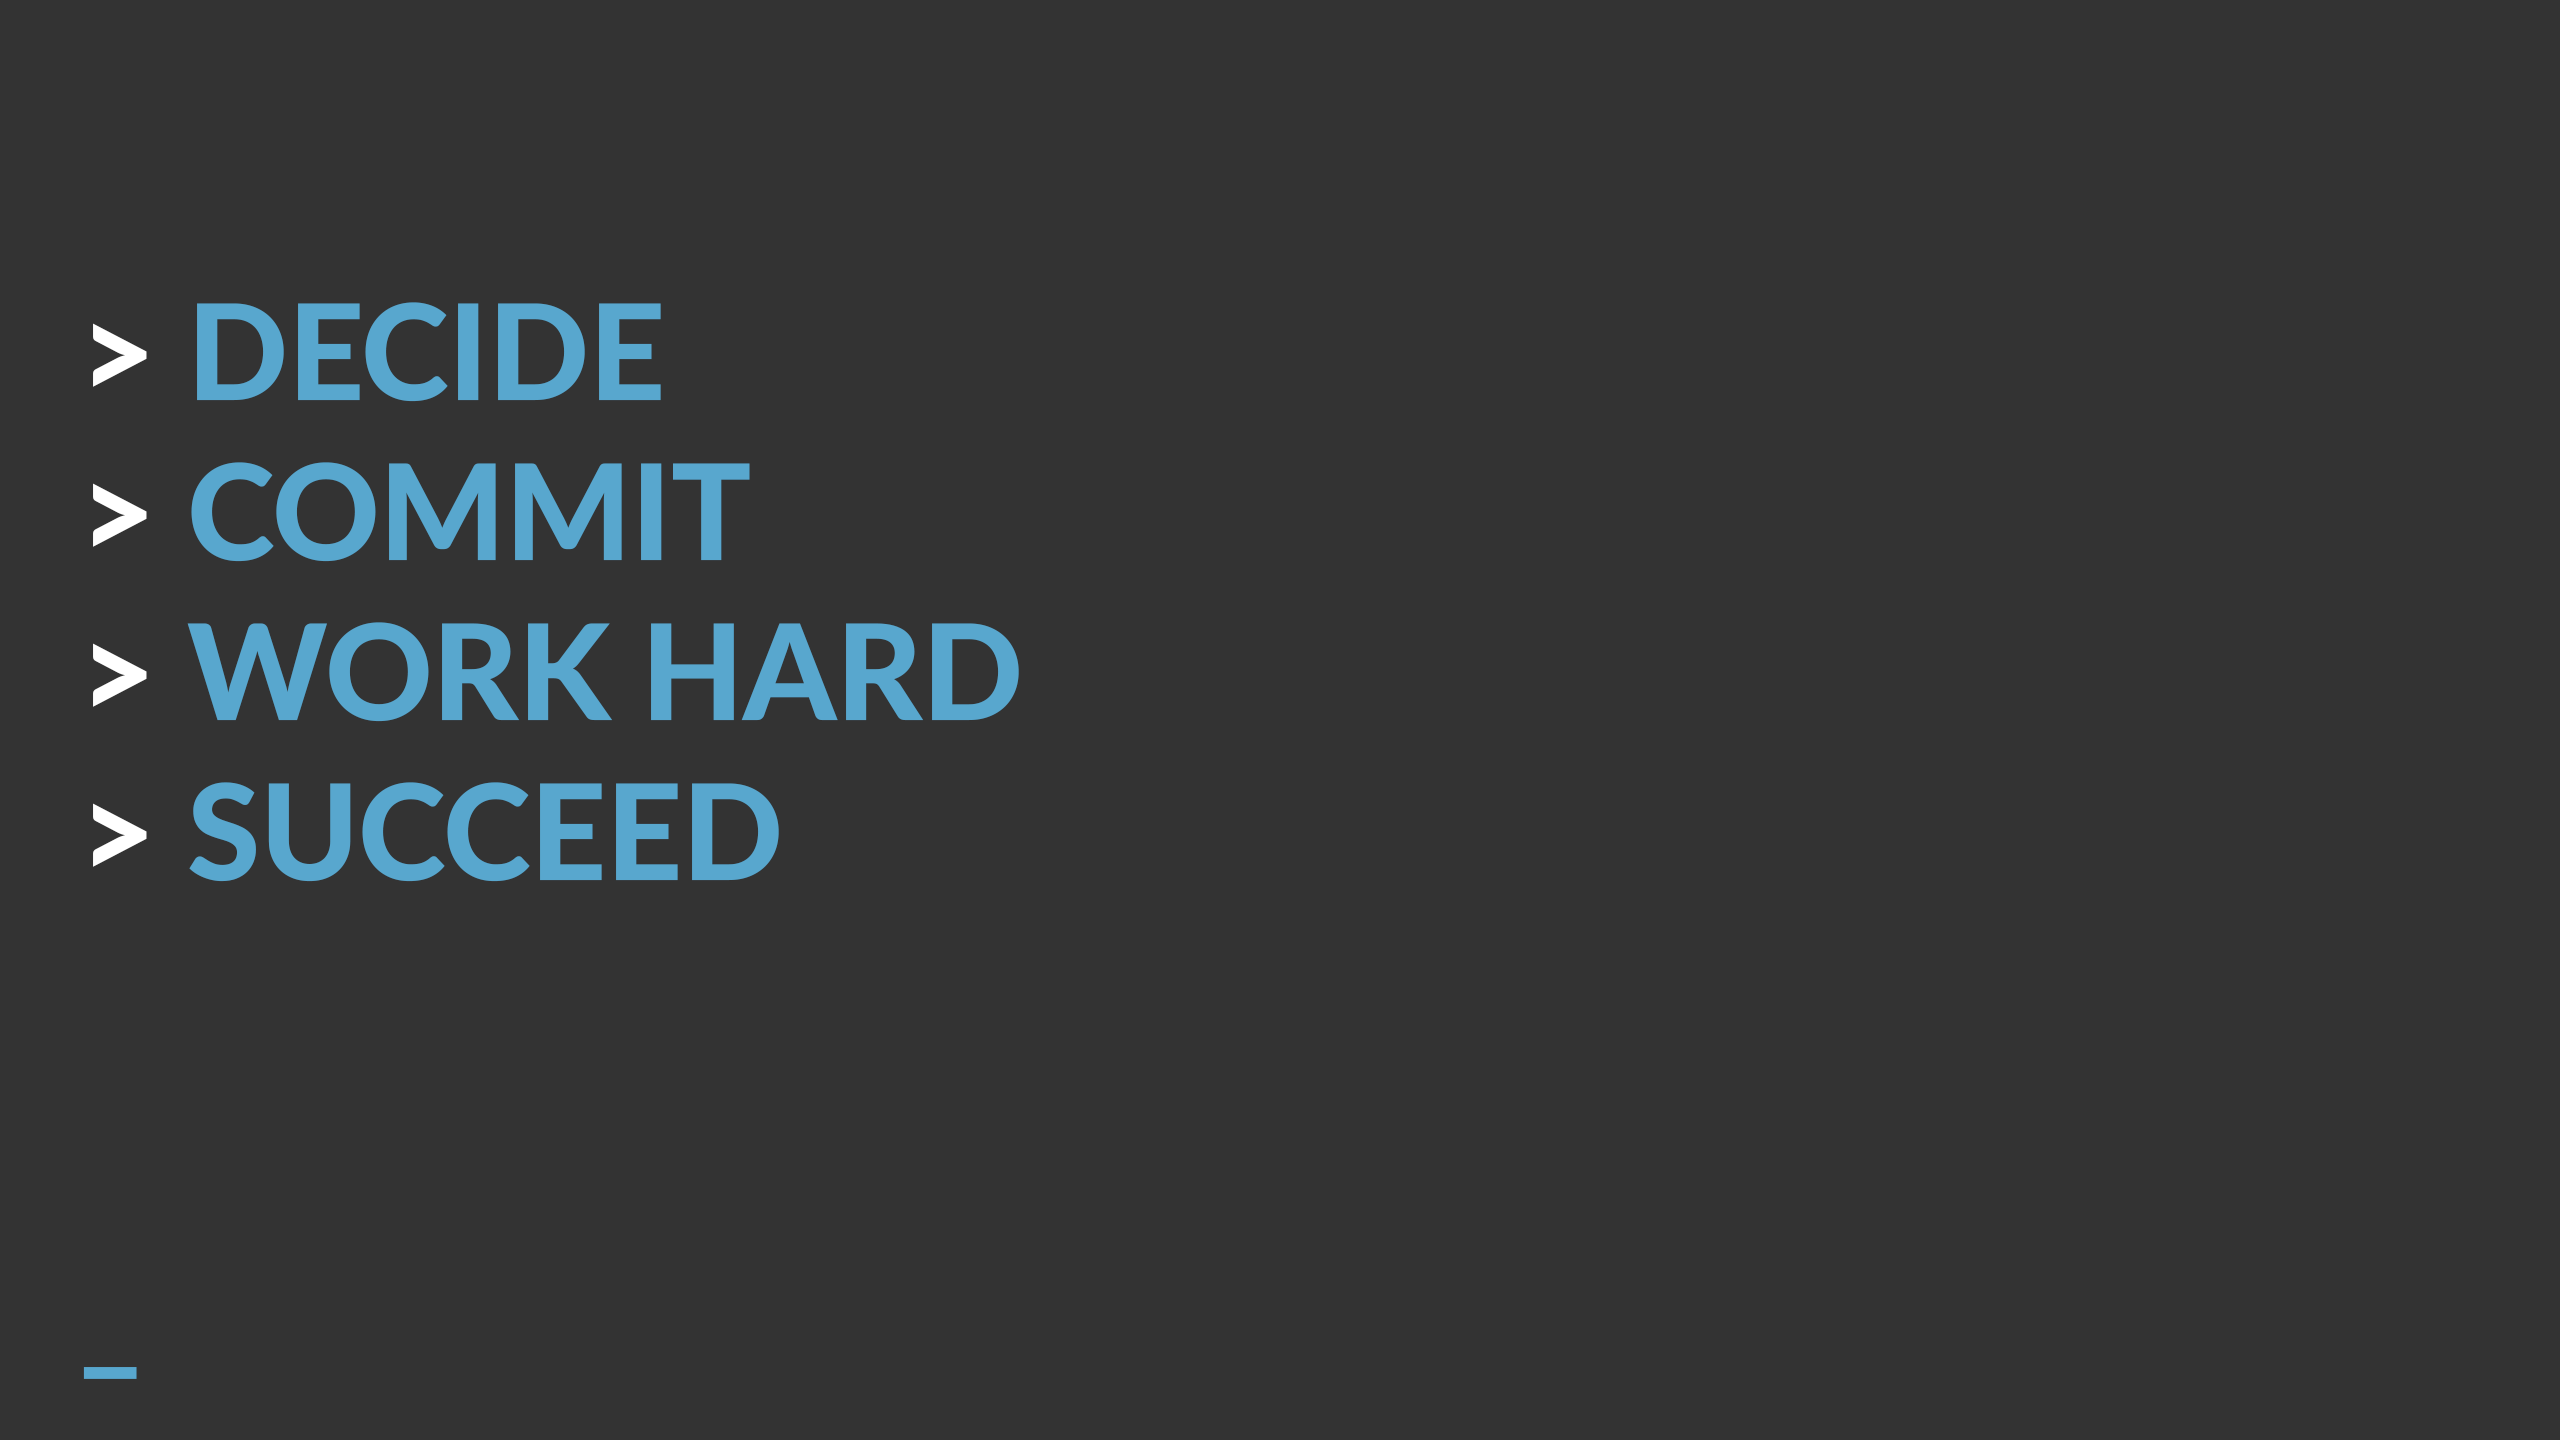 DECIDE > COMMIT > WORK HARD > SUCCEED _ wallpaper I made